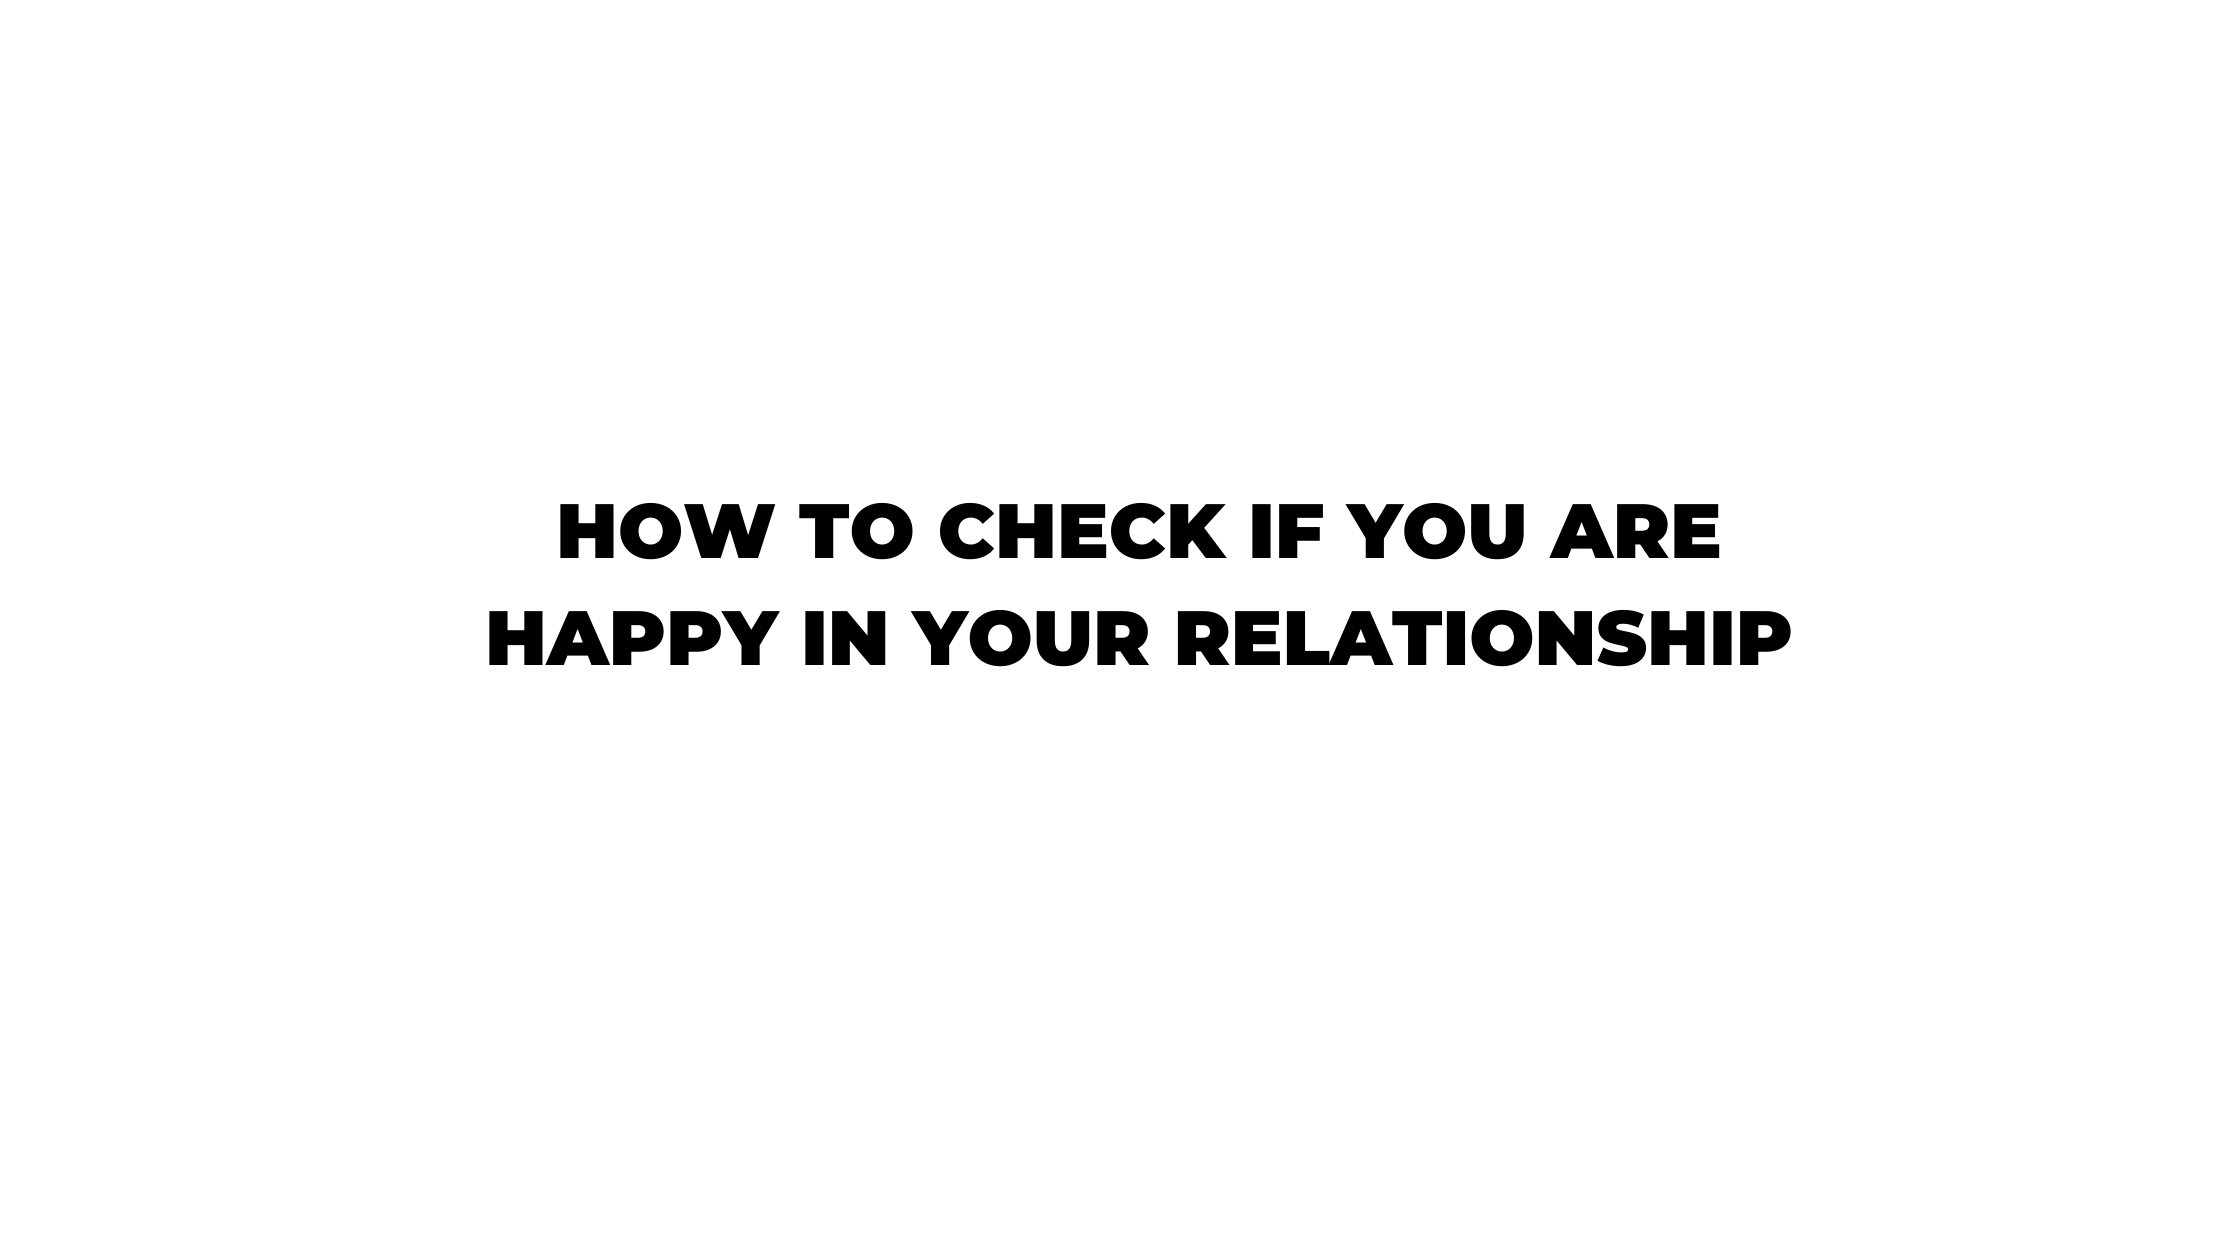 How to Check if You are Happy in Your Relationship